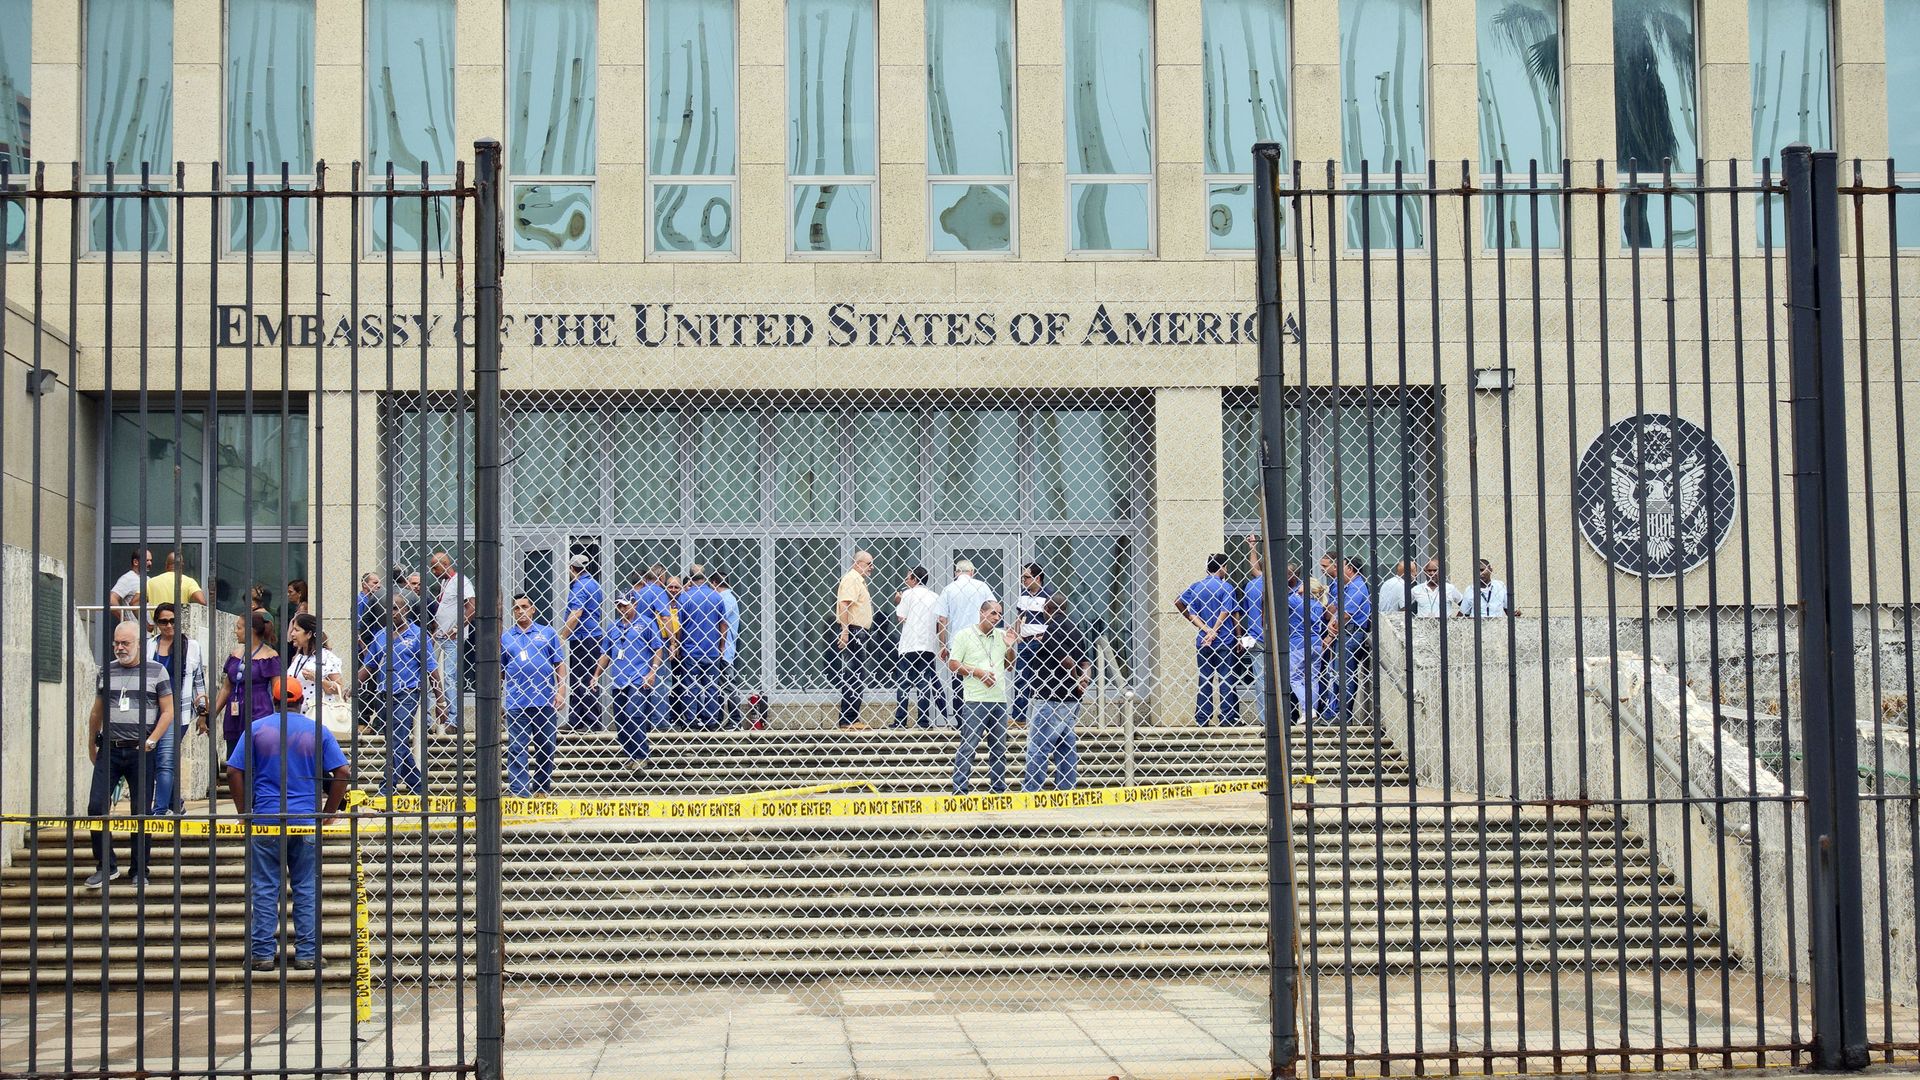 Personnel gather at the U.S. Embassy in Cuba on September 29, 2017 in Havana, Cuba. 